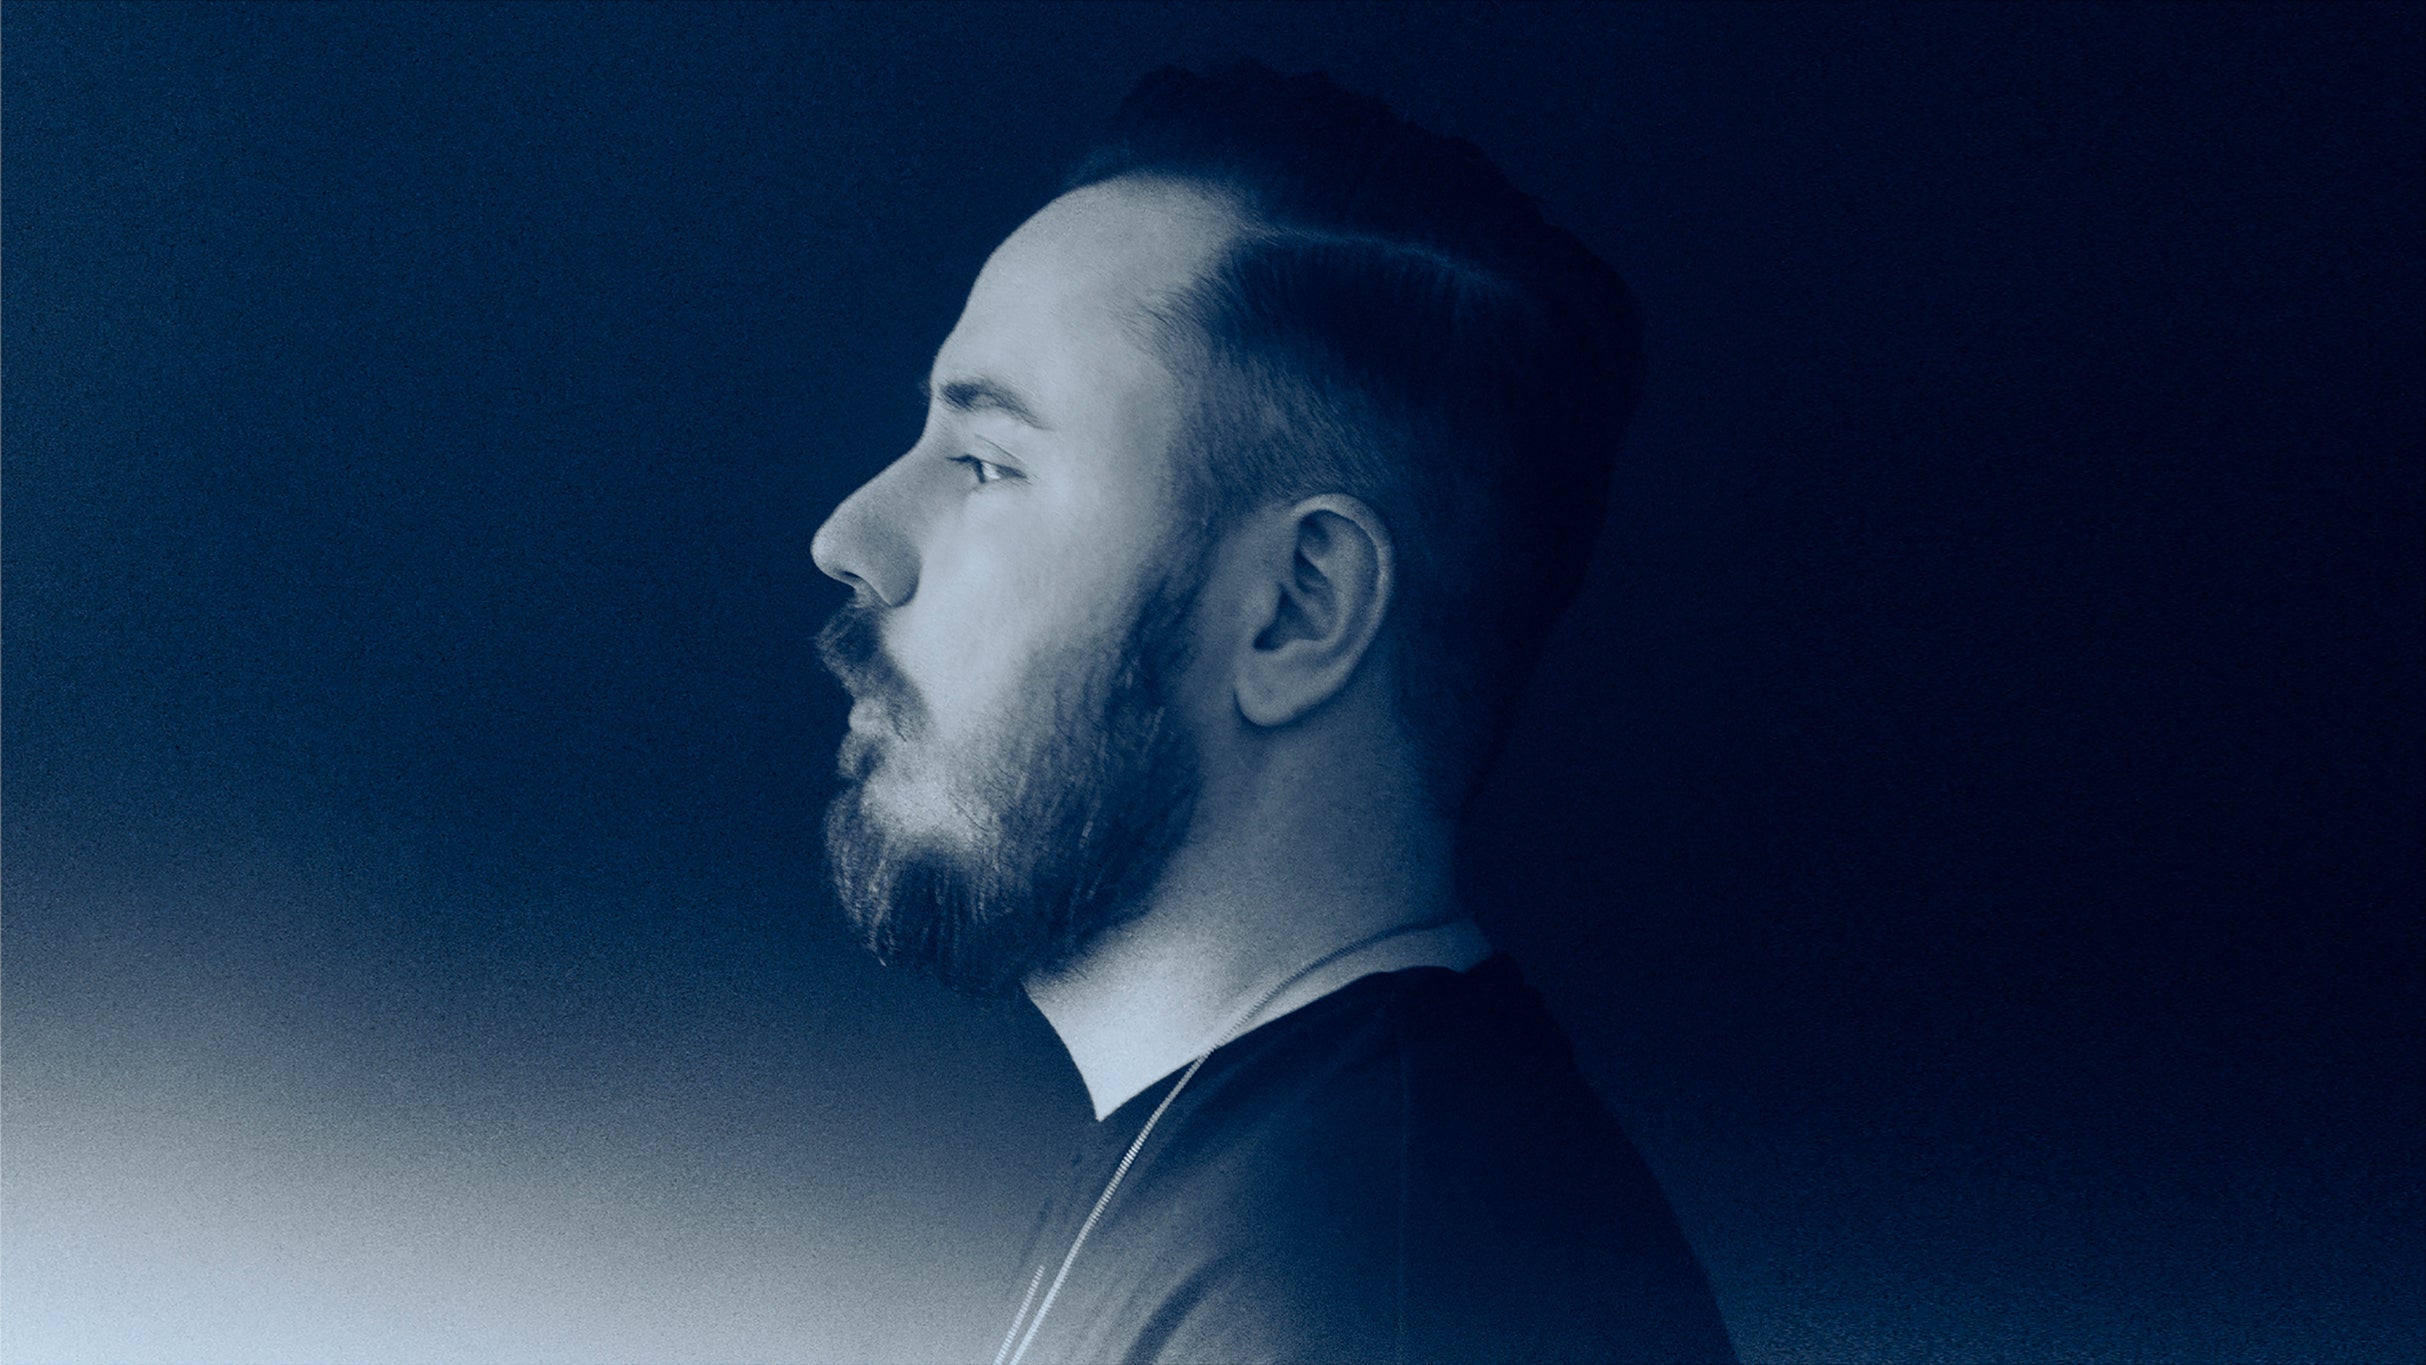 Duke Dumont presale password for approved tickets in Vancouver